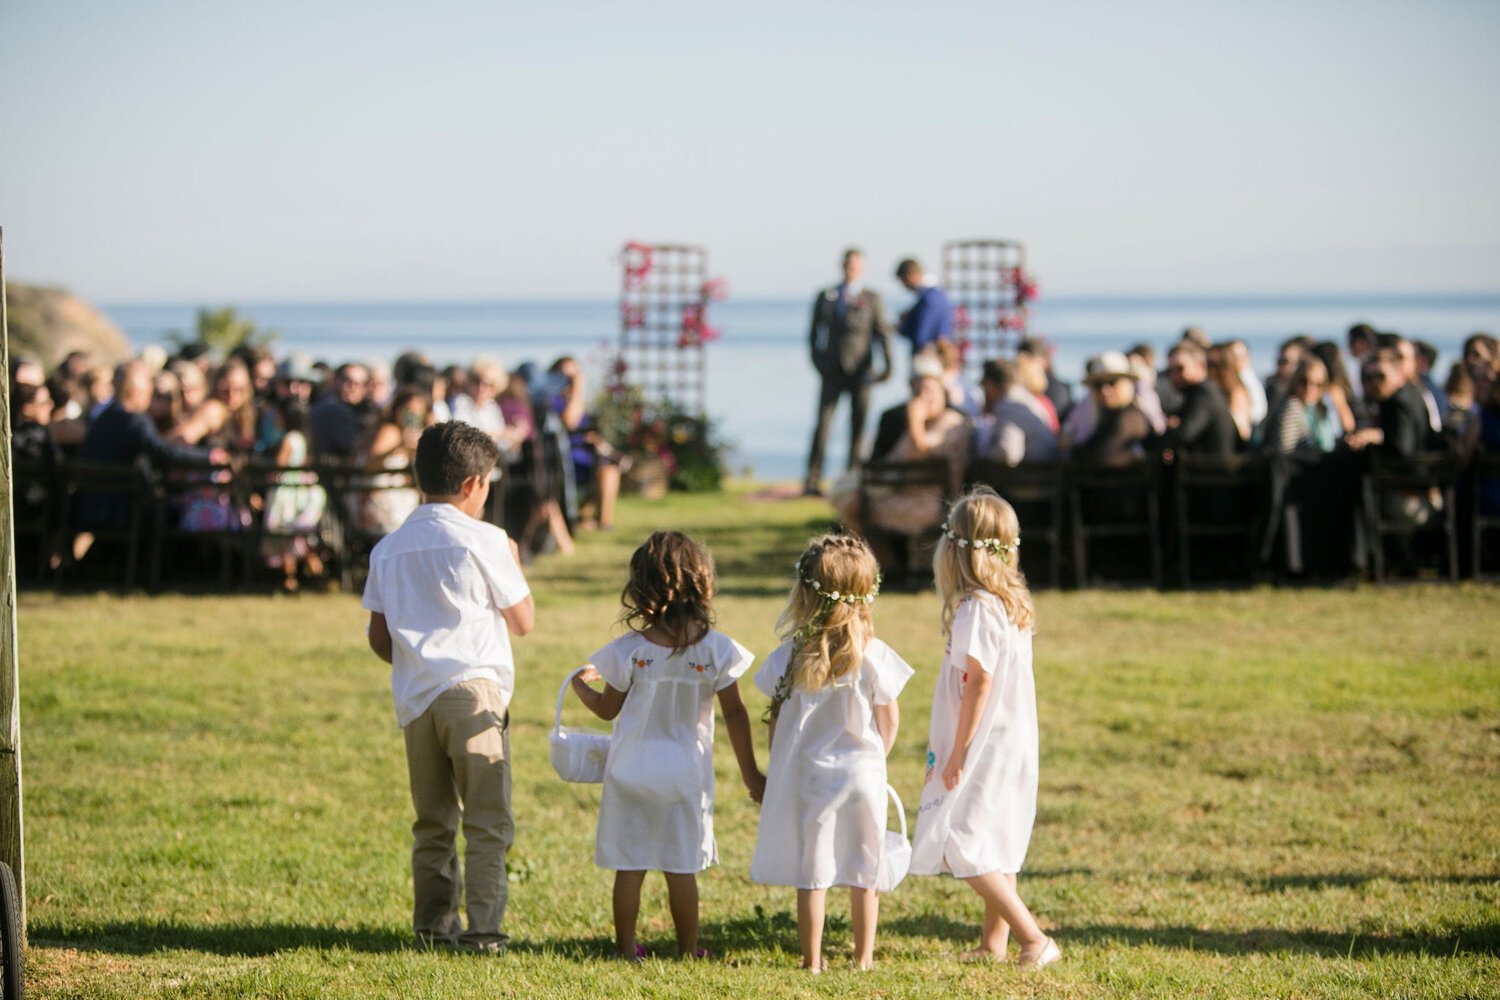 www.santabarbarawedding.com | Nightingale Photography | Rancho Dos Pueblos | Wild Hearts Events | Knot Just Flowers | Flower Girls and Ring Bearer at Ceremony